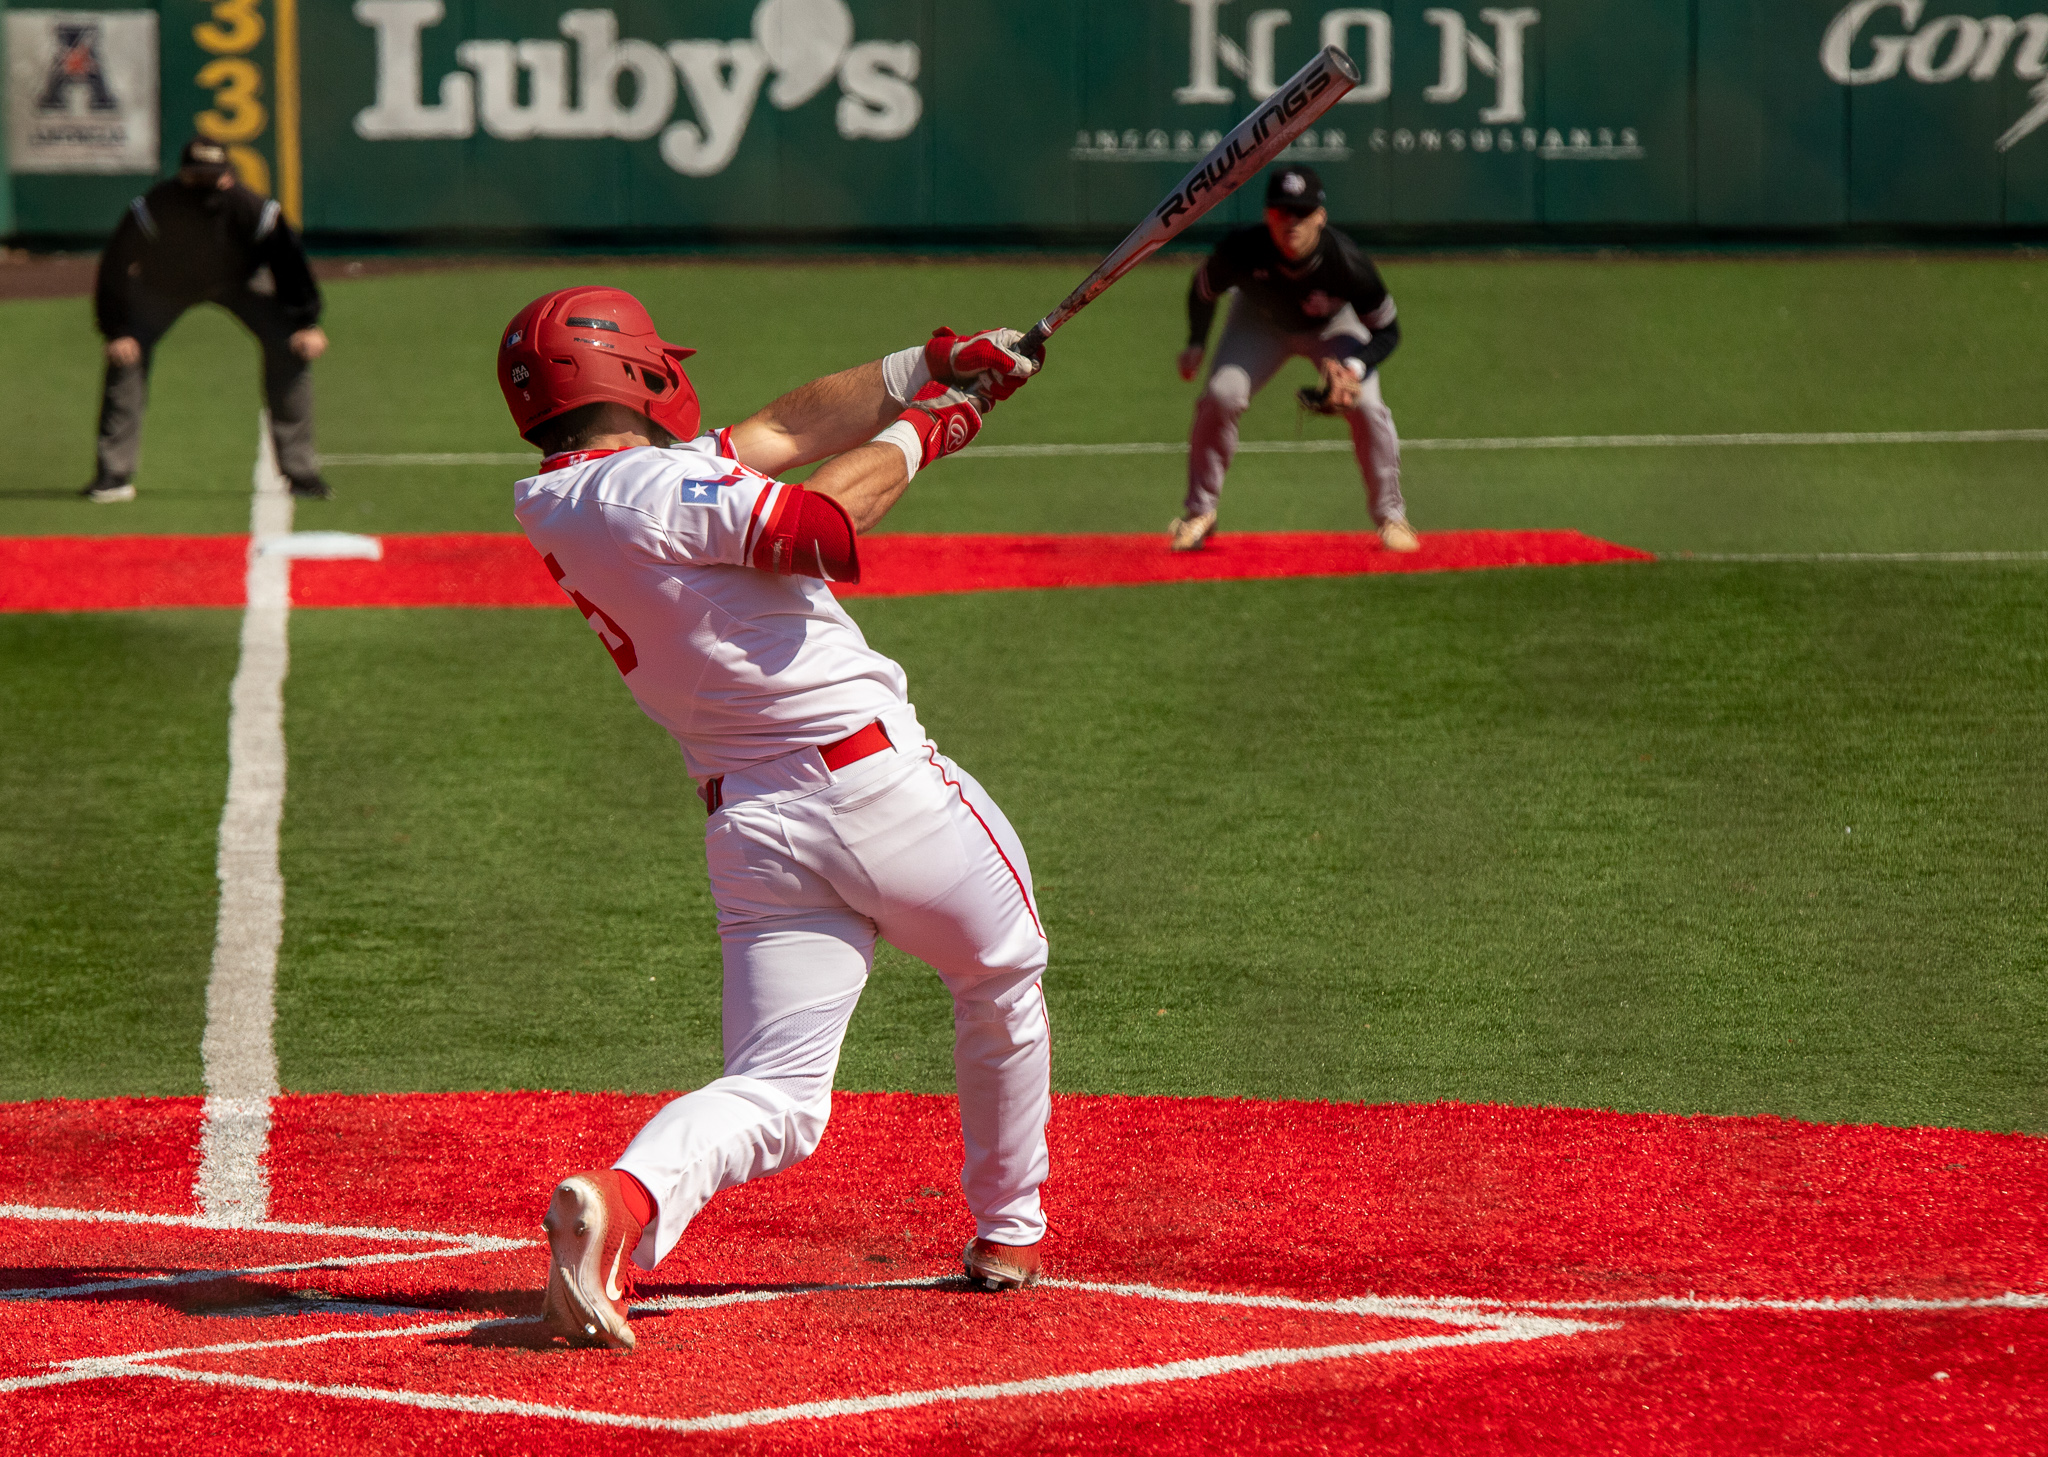 Sophomore infielder Brad Burckel hit a 2-run home run, his first of the season, in UH baseball's win over Texas A&amp;M Corpus Christi. | Andy Yanez/The Cougar